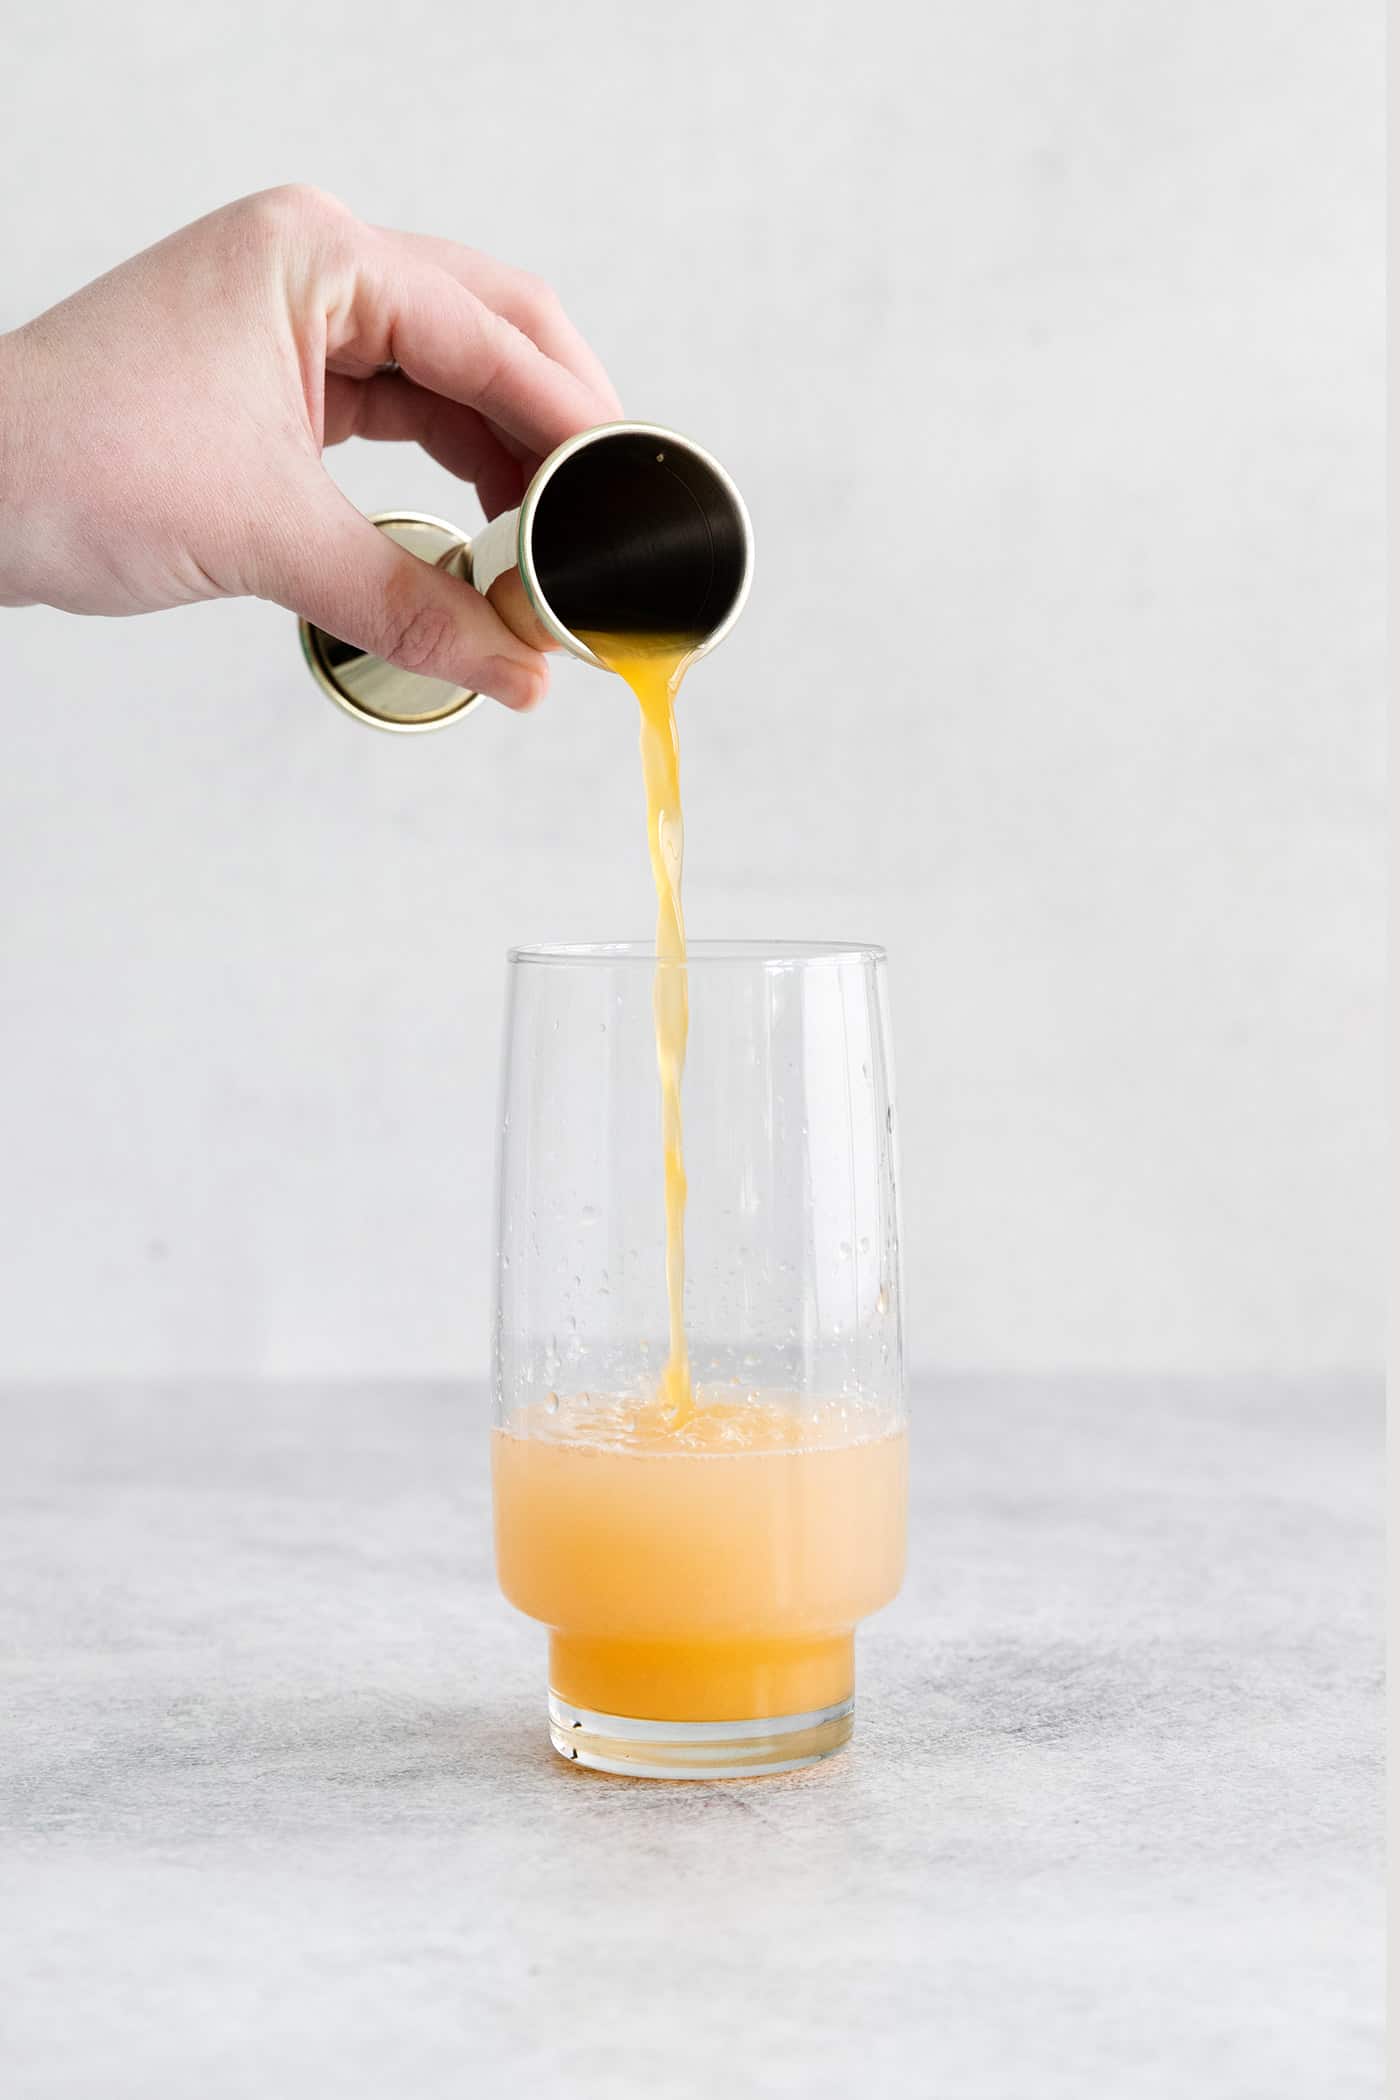 Grapefruit juice being poured into a glass